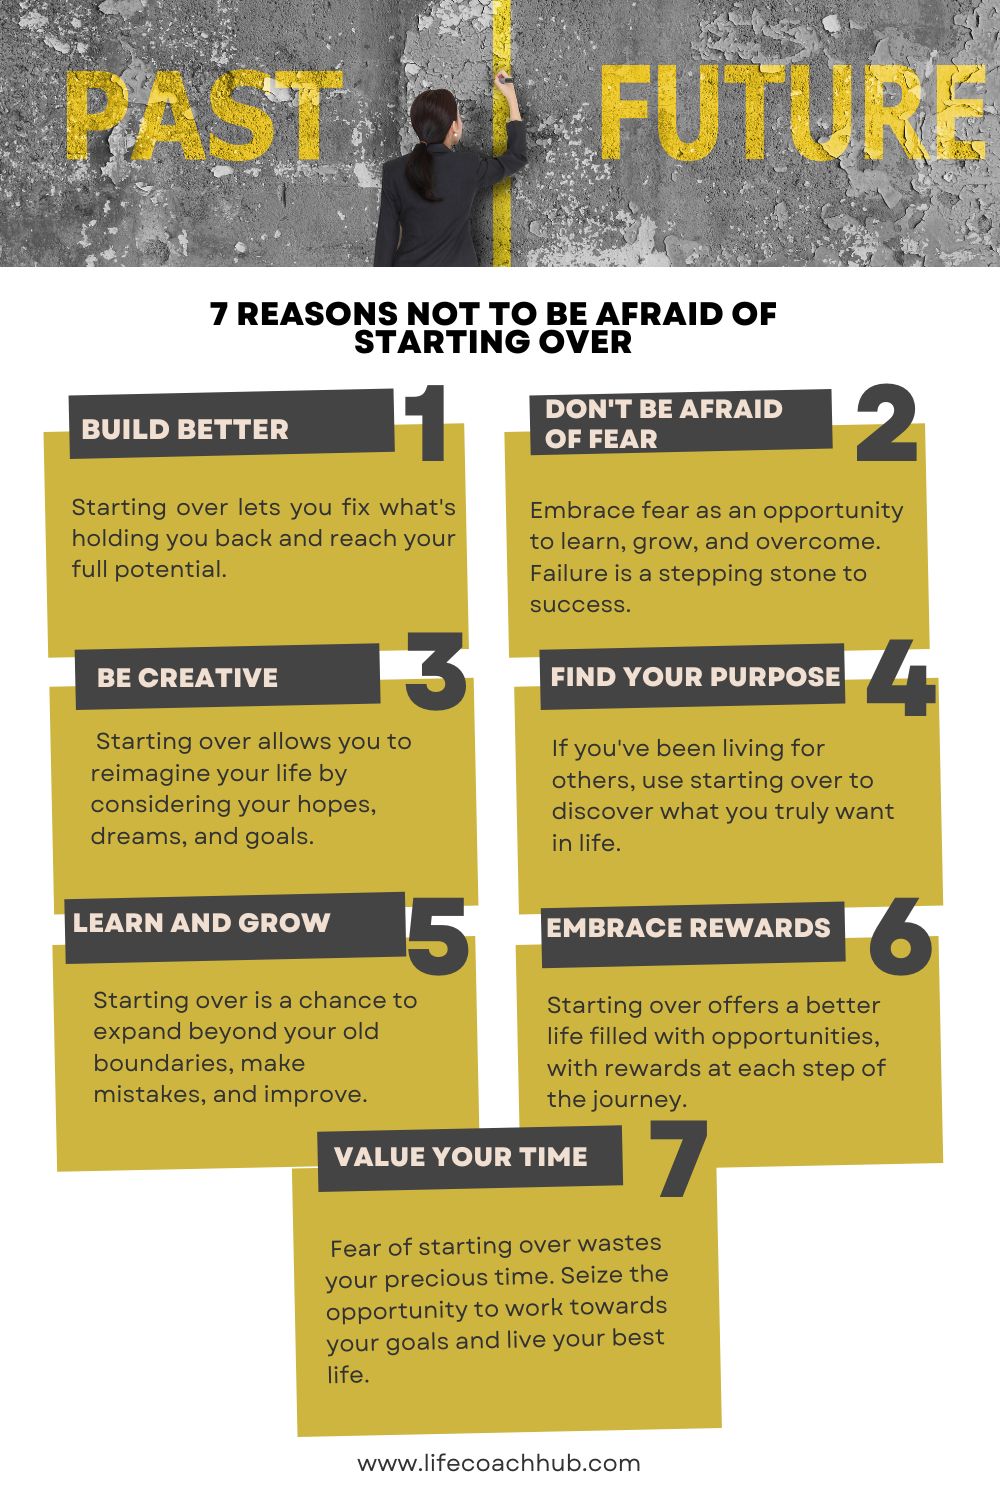 7 reasons not to be afraid of starting over